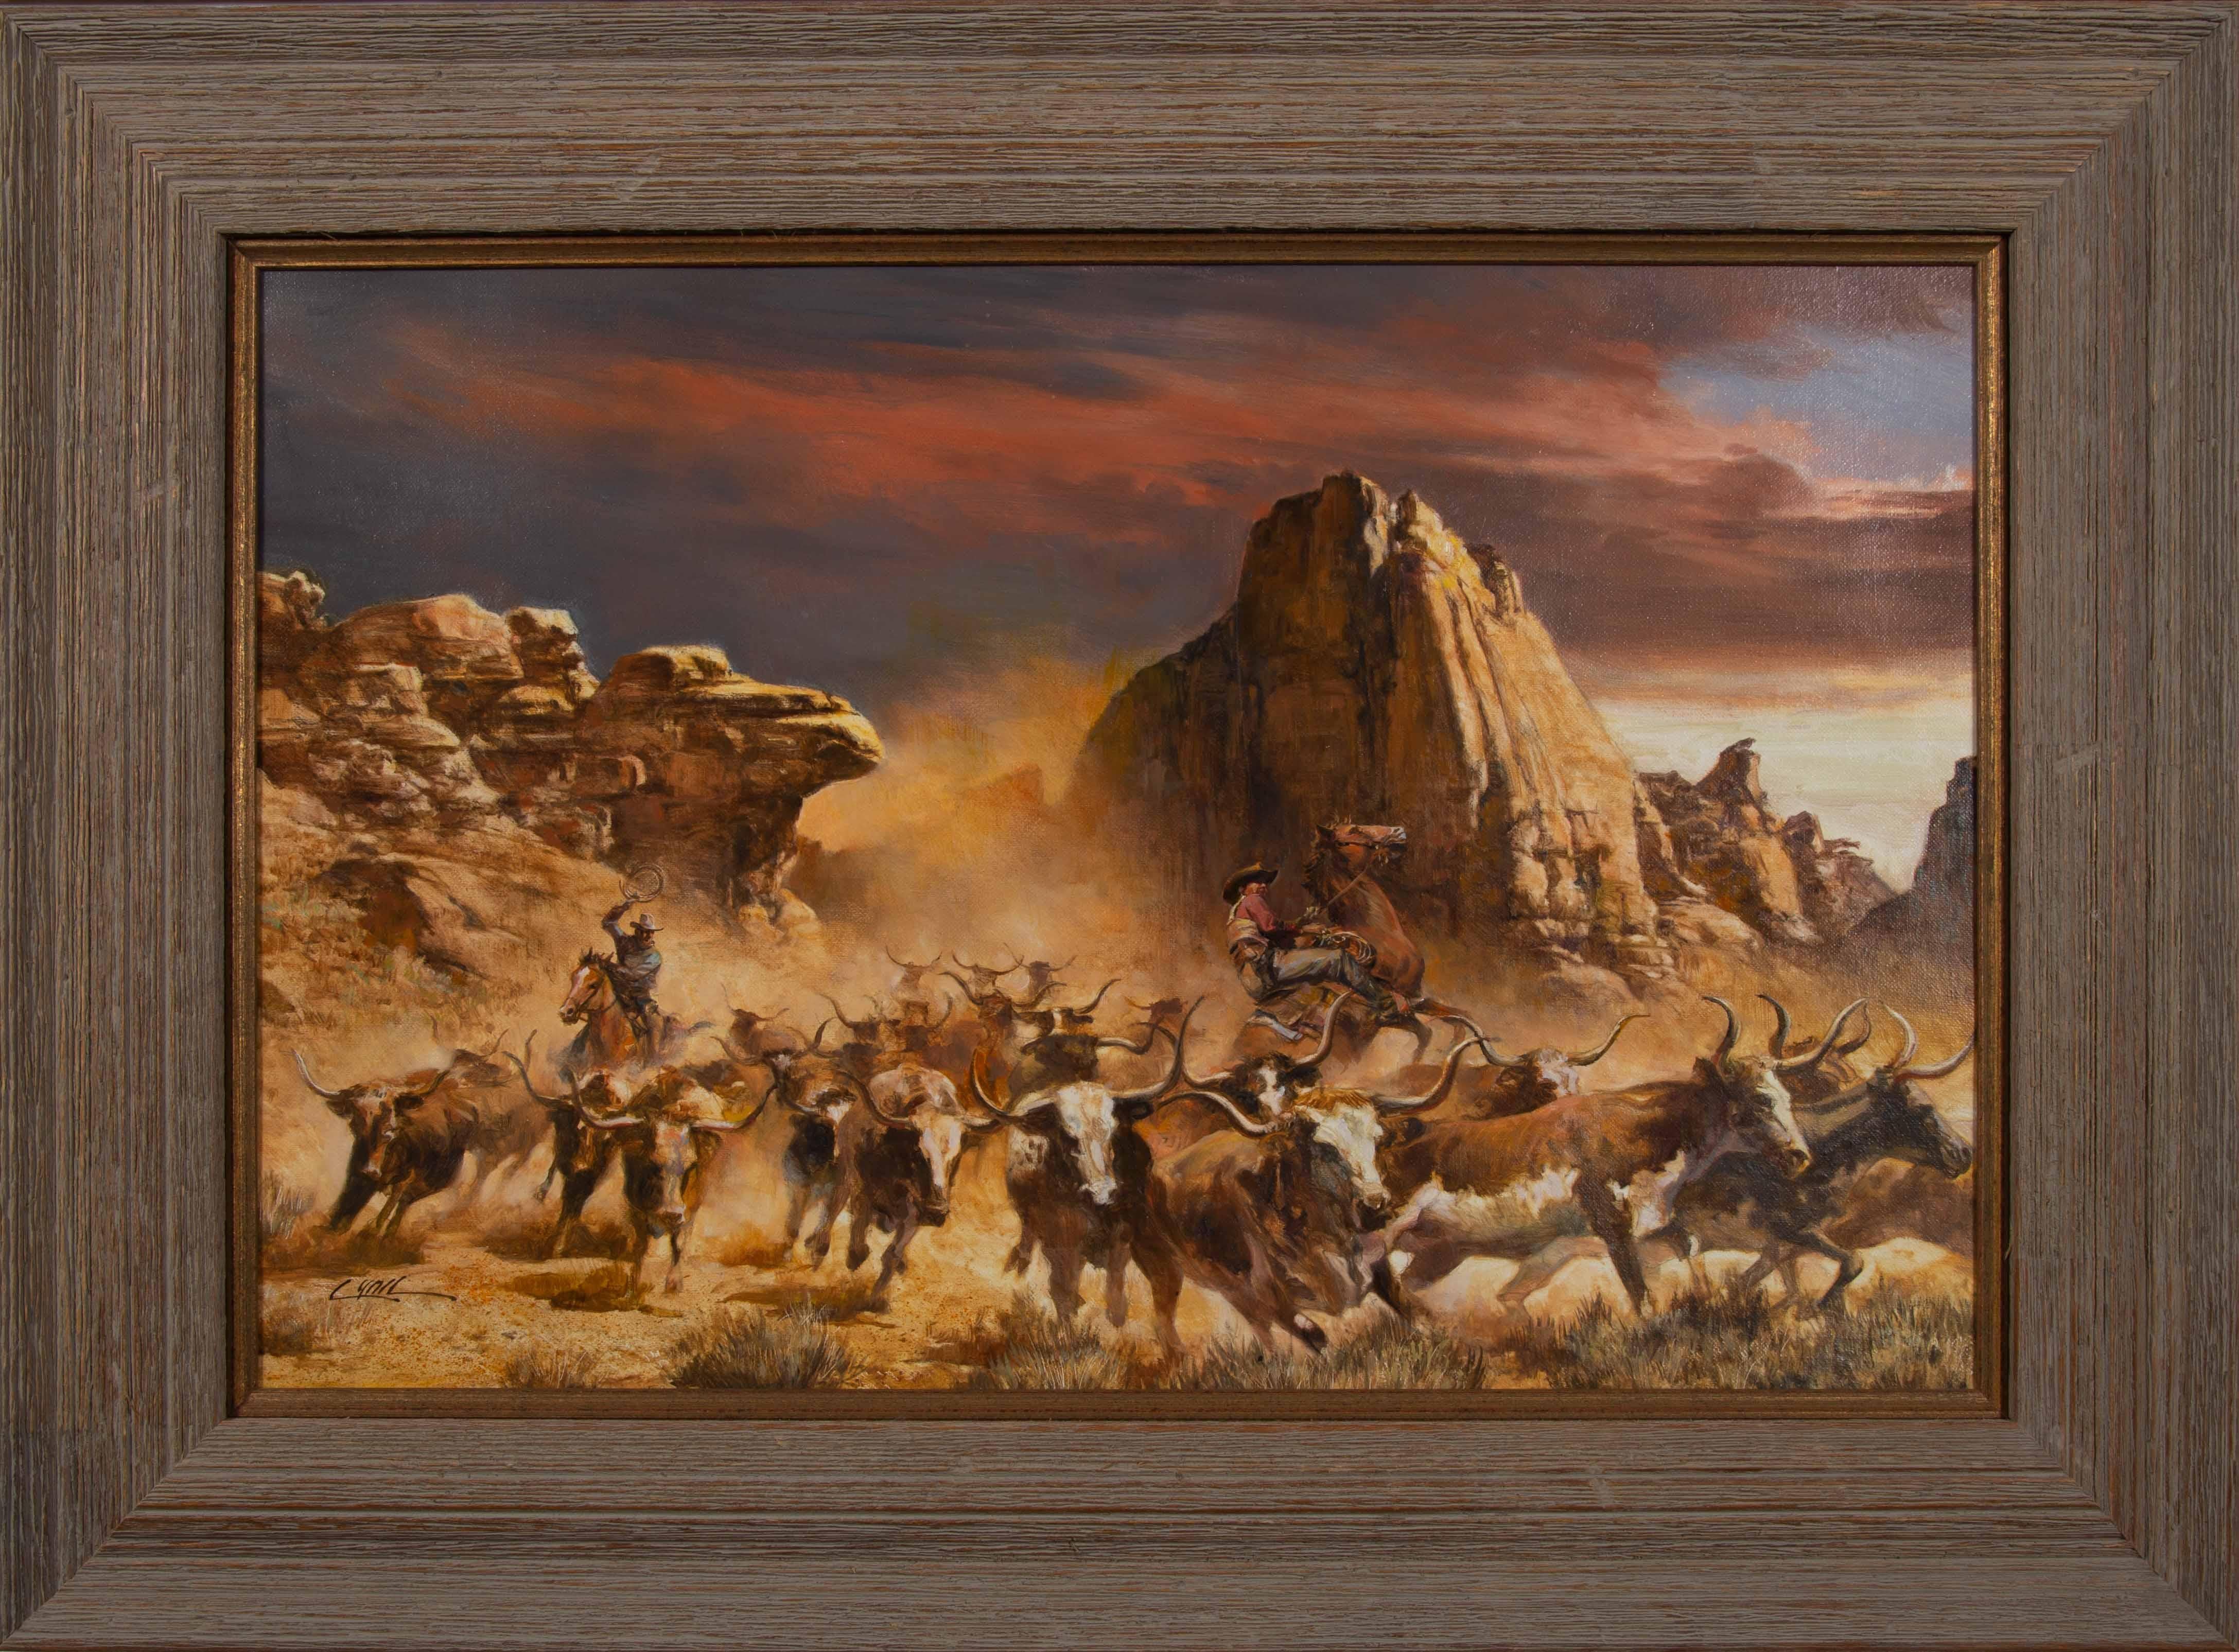 Dennis Lyall Figurative Painting - Rio Hondo, Cowboy Oil Painting on Canvas, Western Art